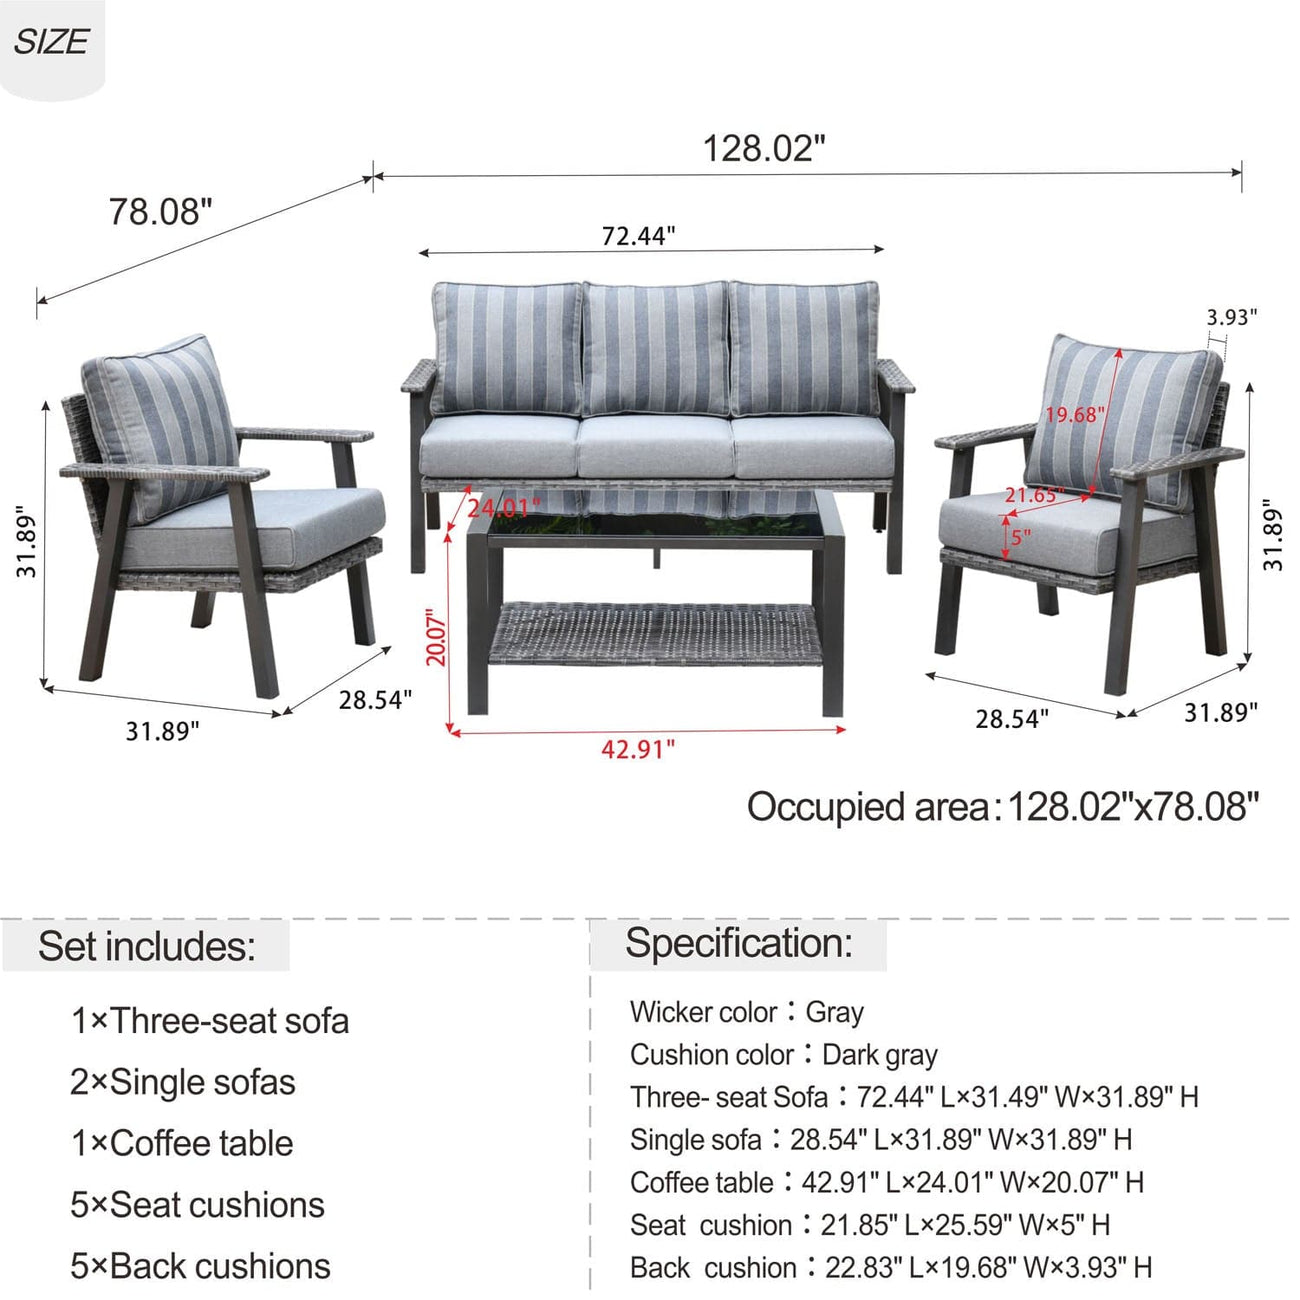 Patio Conversation Set 5 Person Seating With Table,5'' Cushion, Olefin